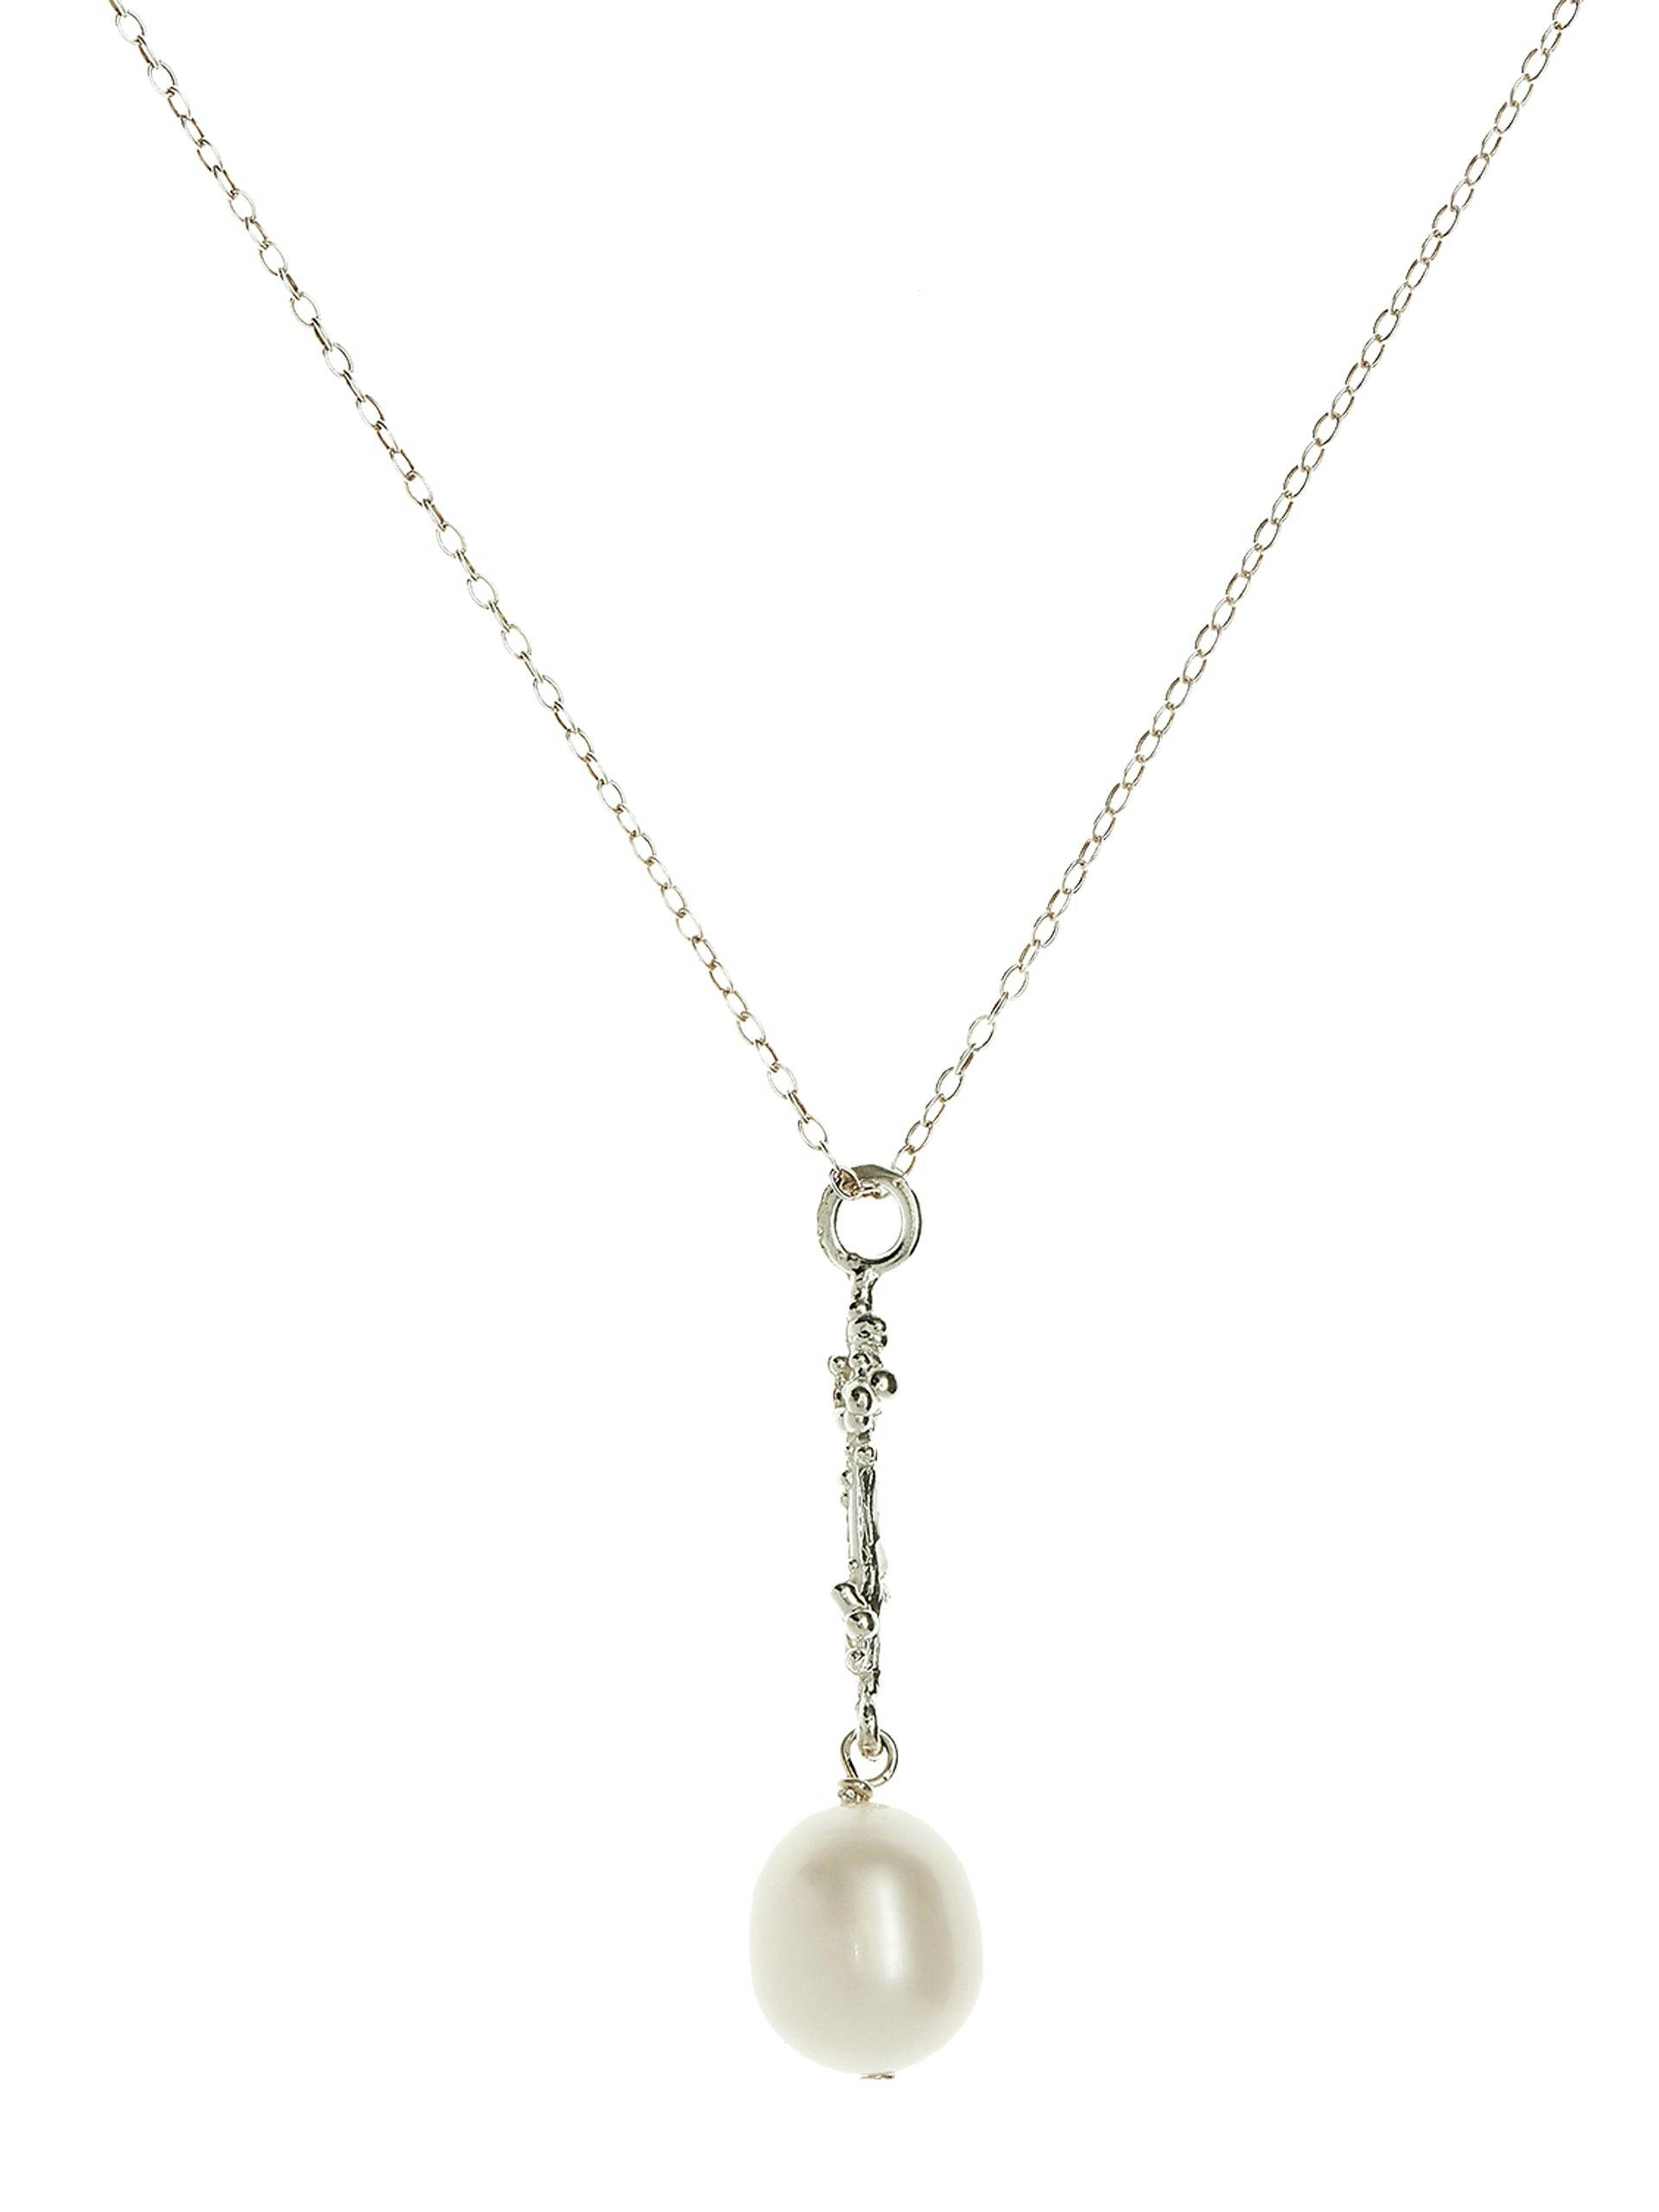 The Lustre of the Moon necklace